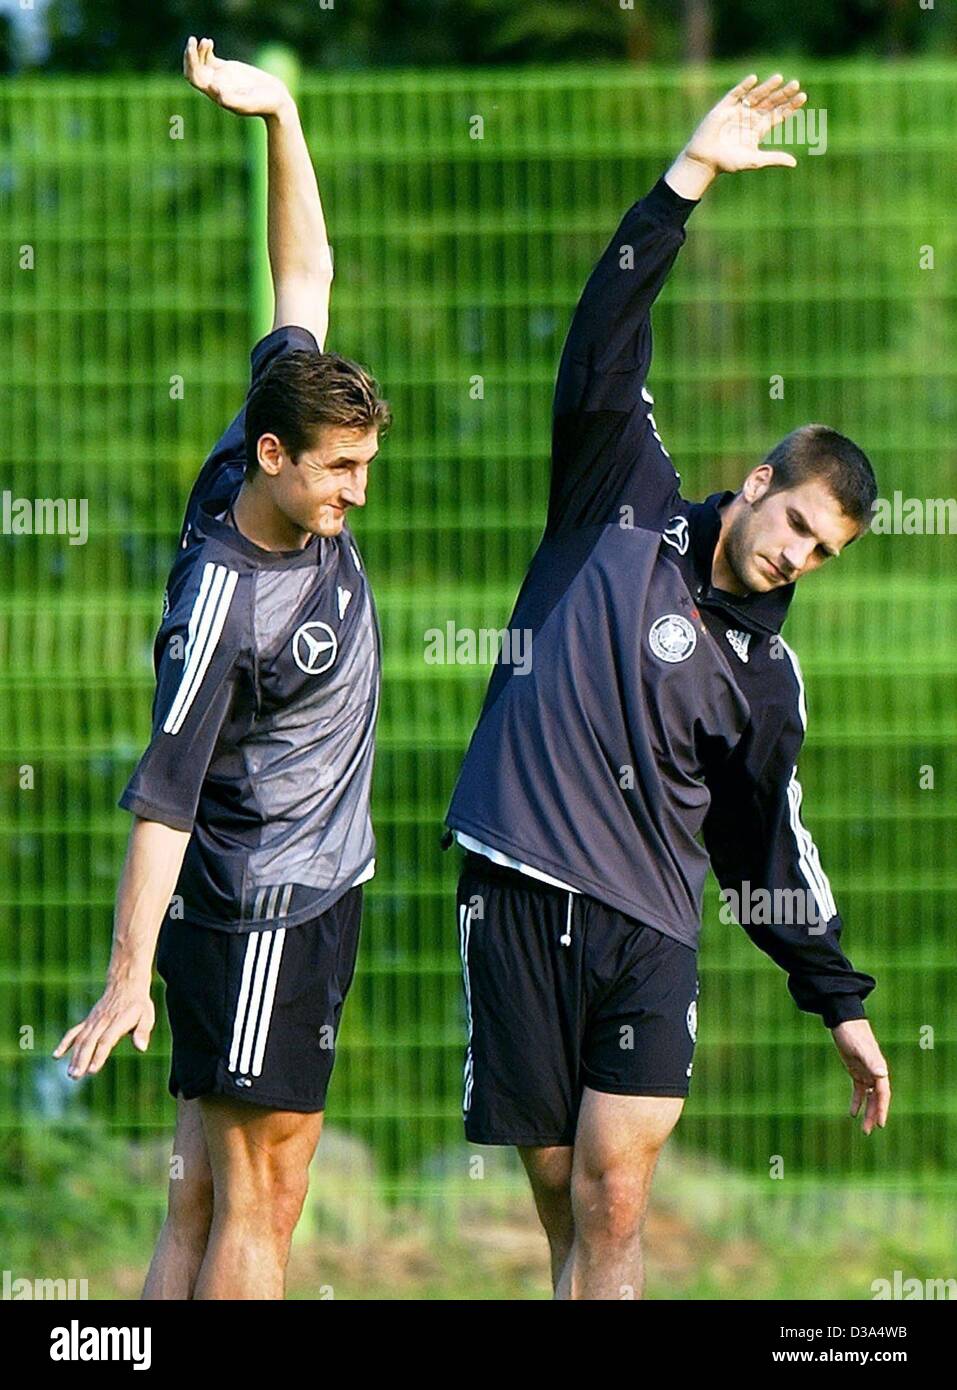 (dpa) - German team players Miroslav Klose (L) and Torsten Frings stretch during a training session for the Soccer World Cup in Seogwipo, South Korea, 18 June 2002. Stock Photo